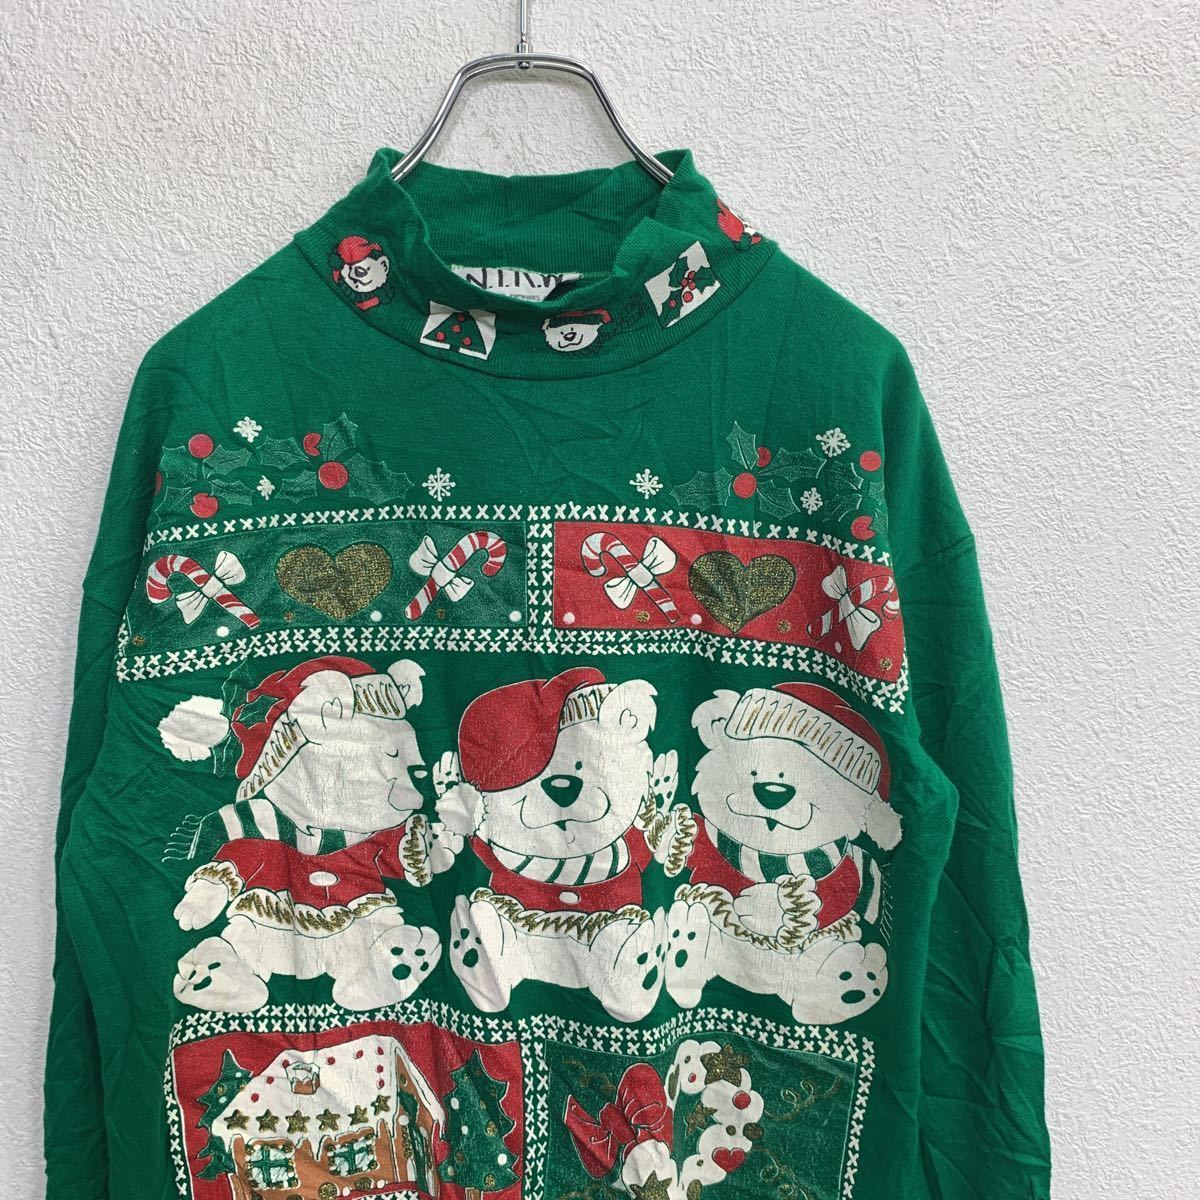 N.Y.K.W. sweat sweatshirt lady's S~M size about Christmas pattern green old clothes . America buying up t2203-3268